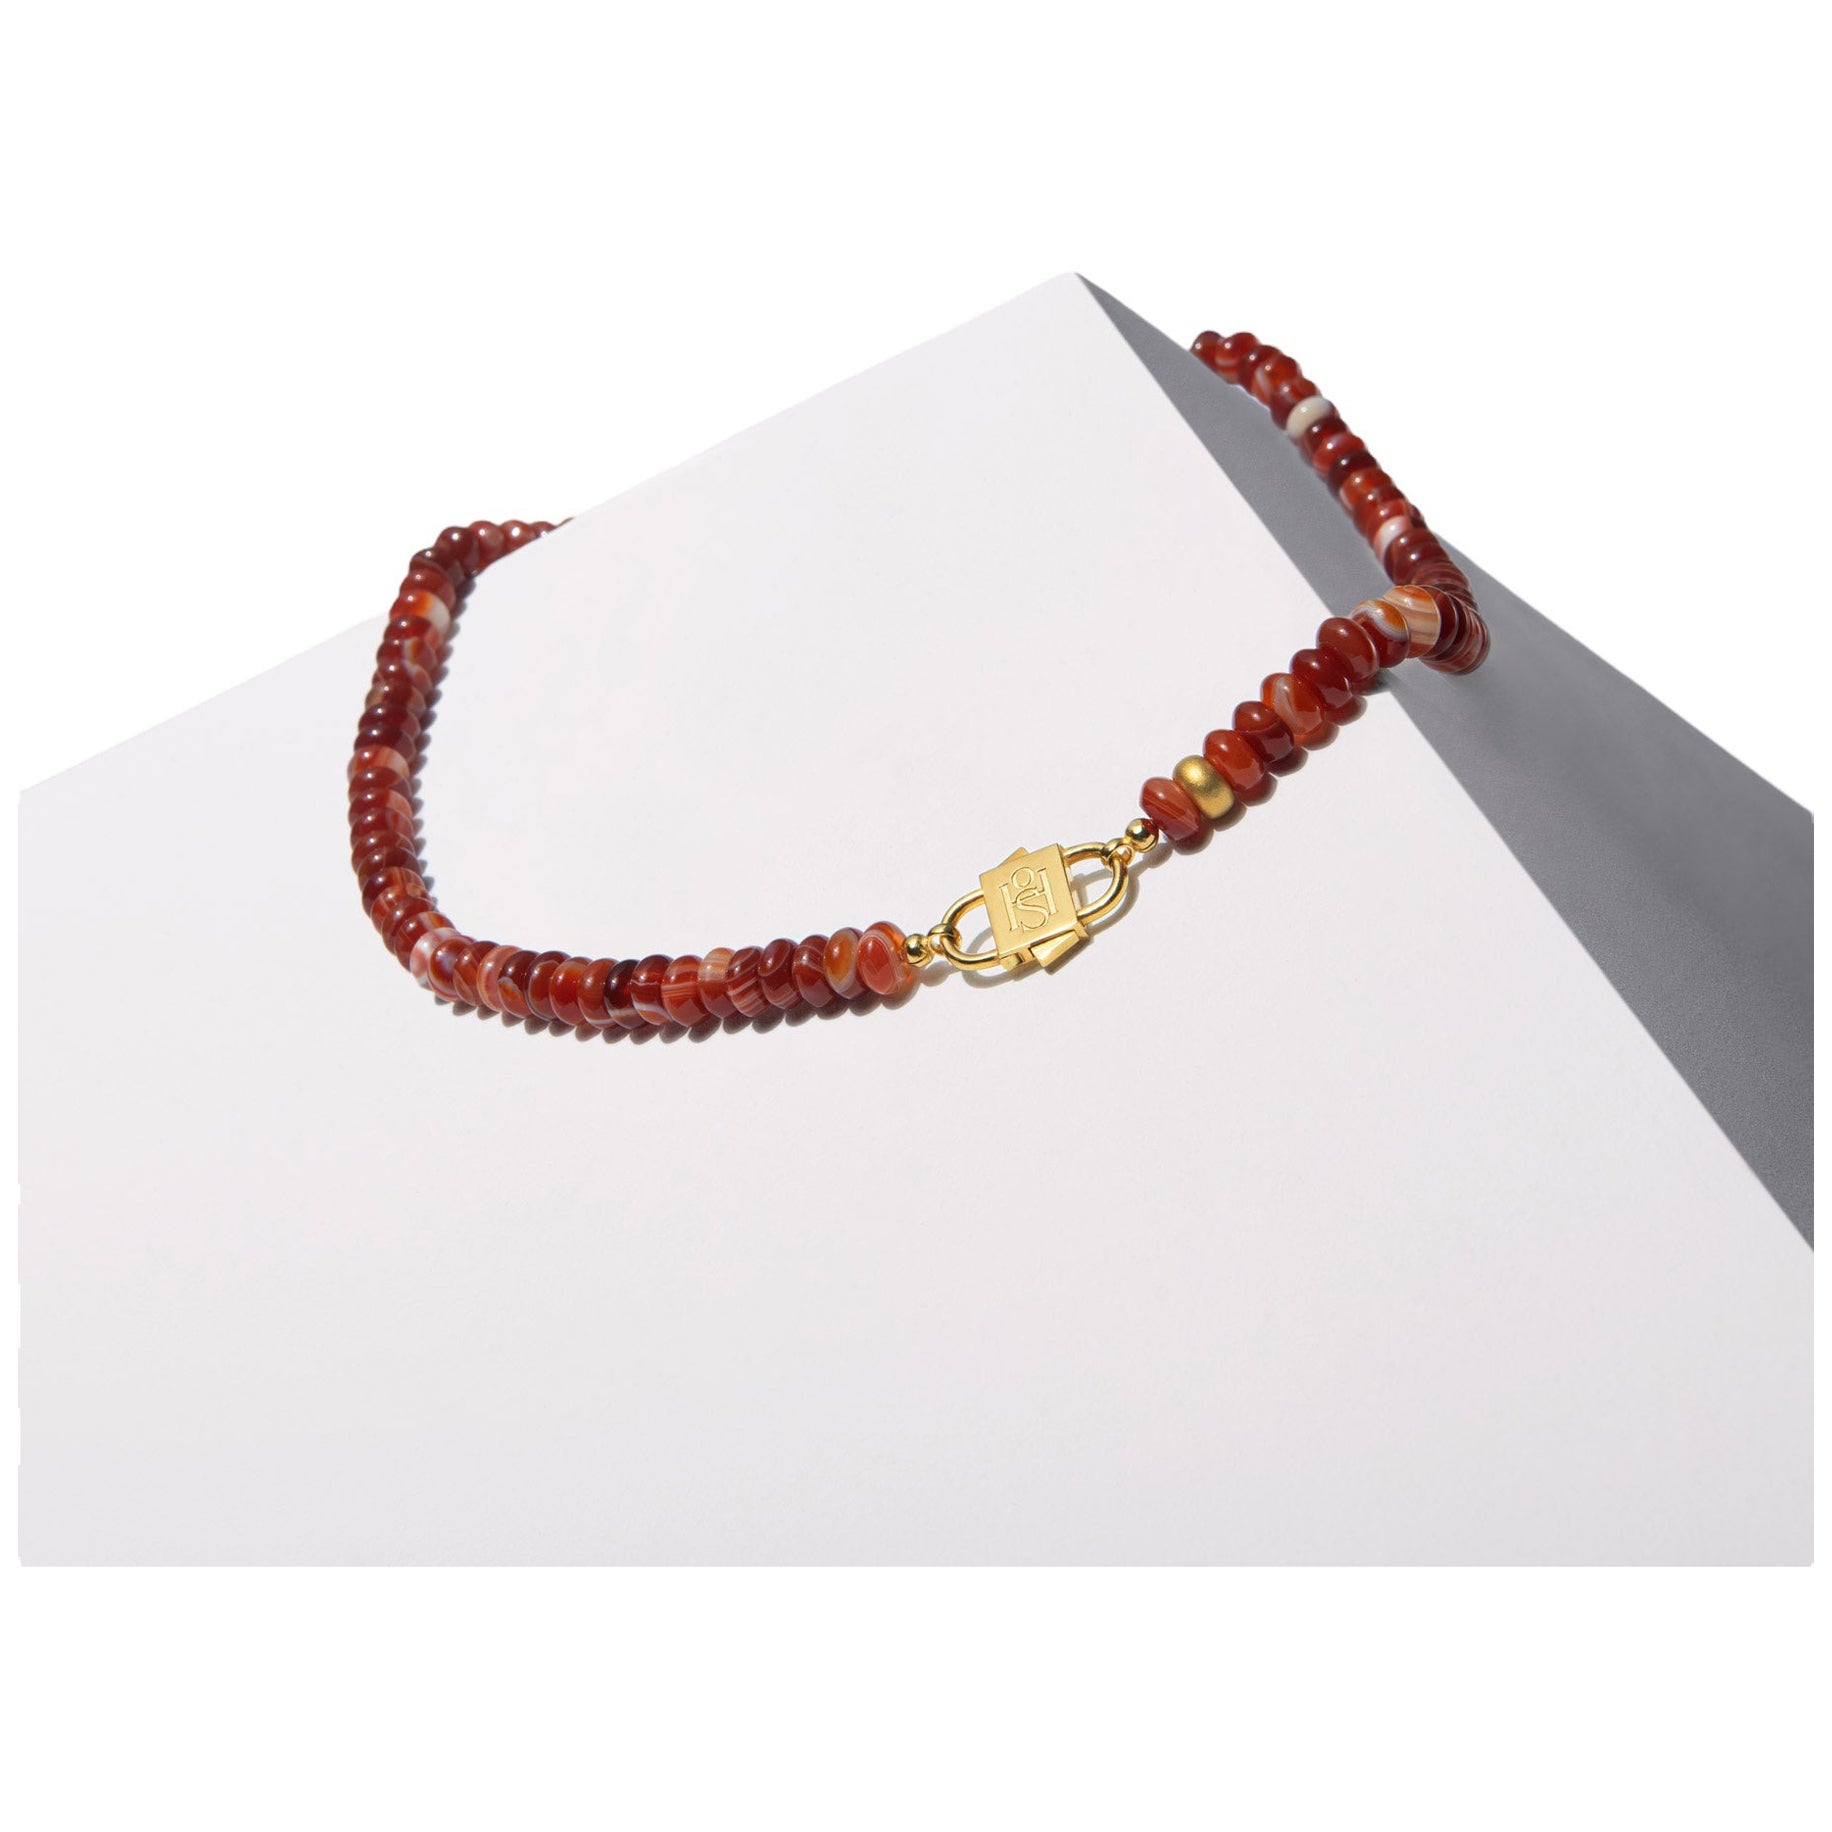  House of Sol Red Agate Necklace with Baby HoS Lock